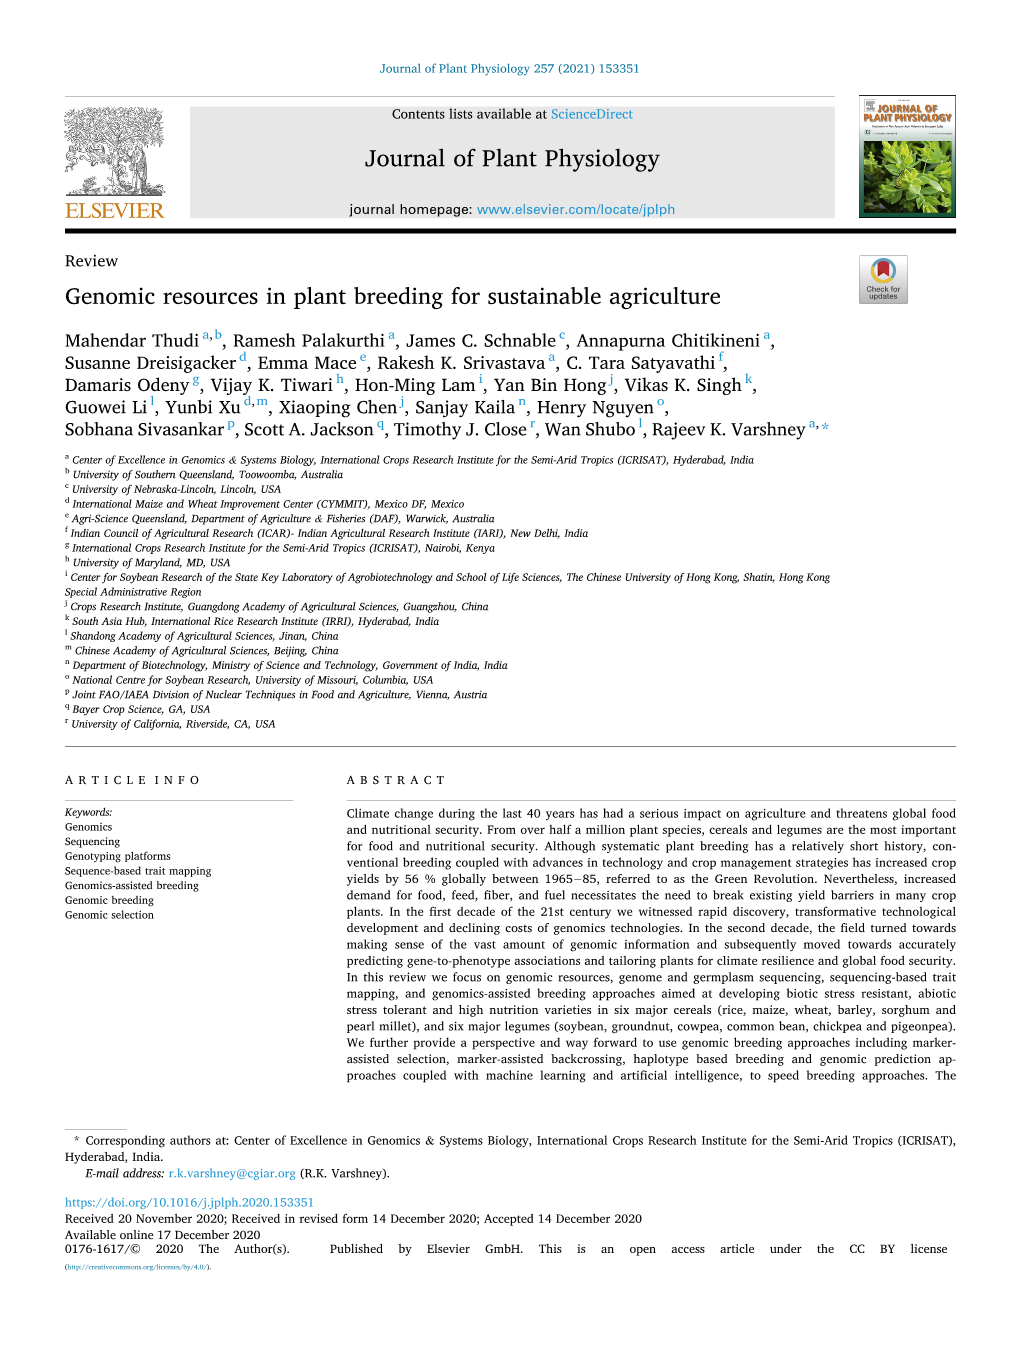 Genomic Resources in Plant Breeding for Sustainable Agriculture